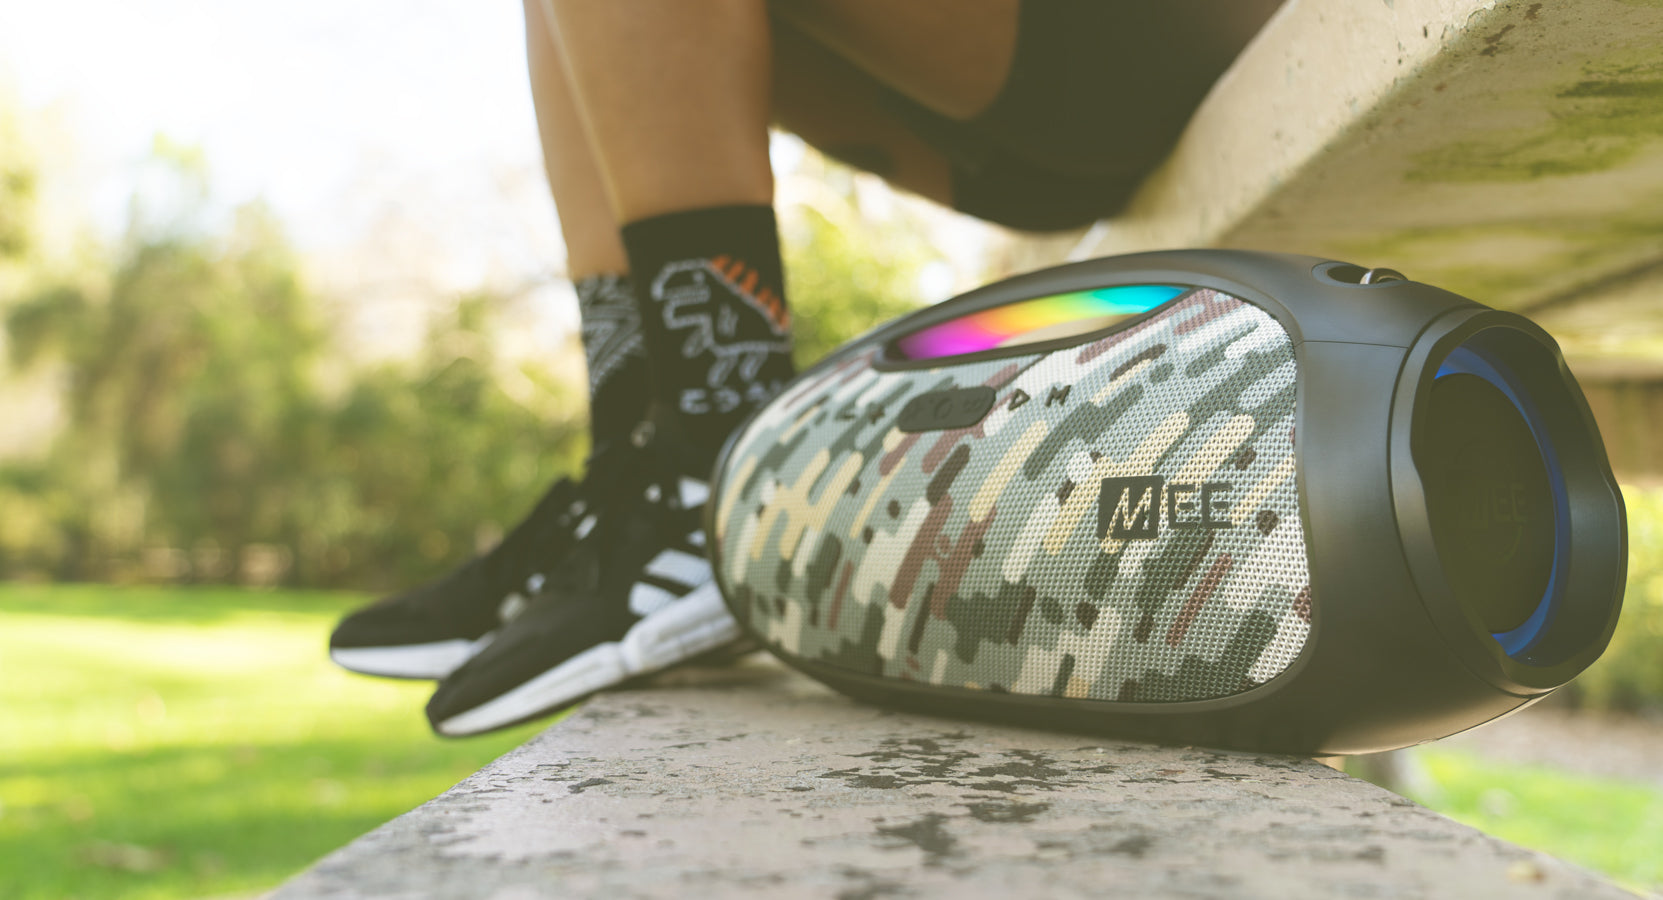 A portable camouflage speaker sits on a concrete ledge outdoors next to a person wearing sneakers and patterned socks. the speaker is lit up with colorful lights.